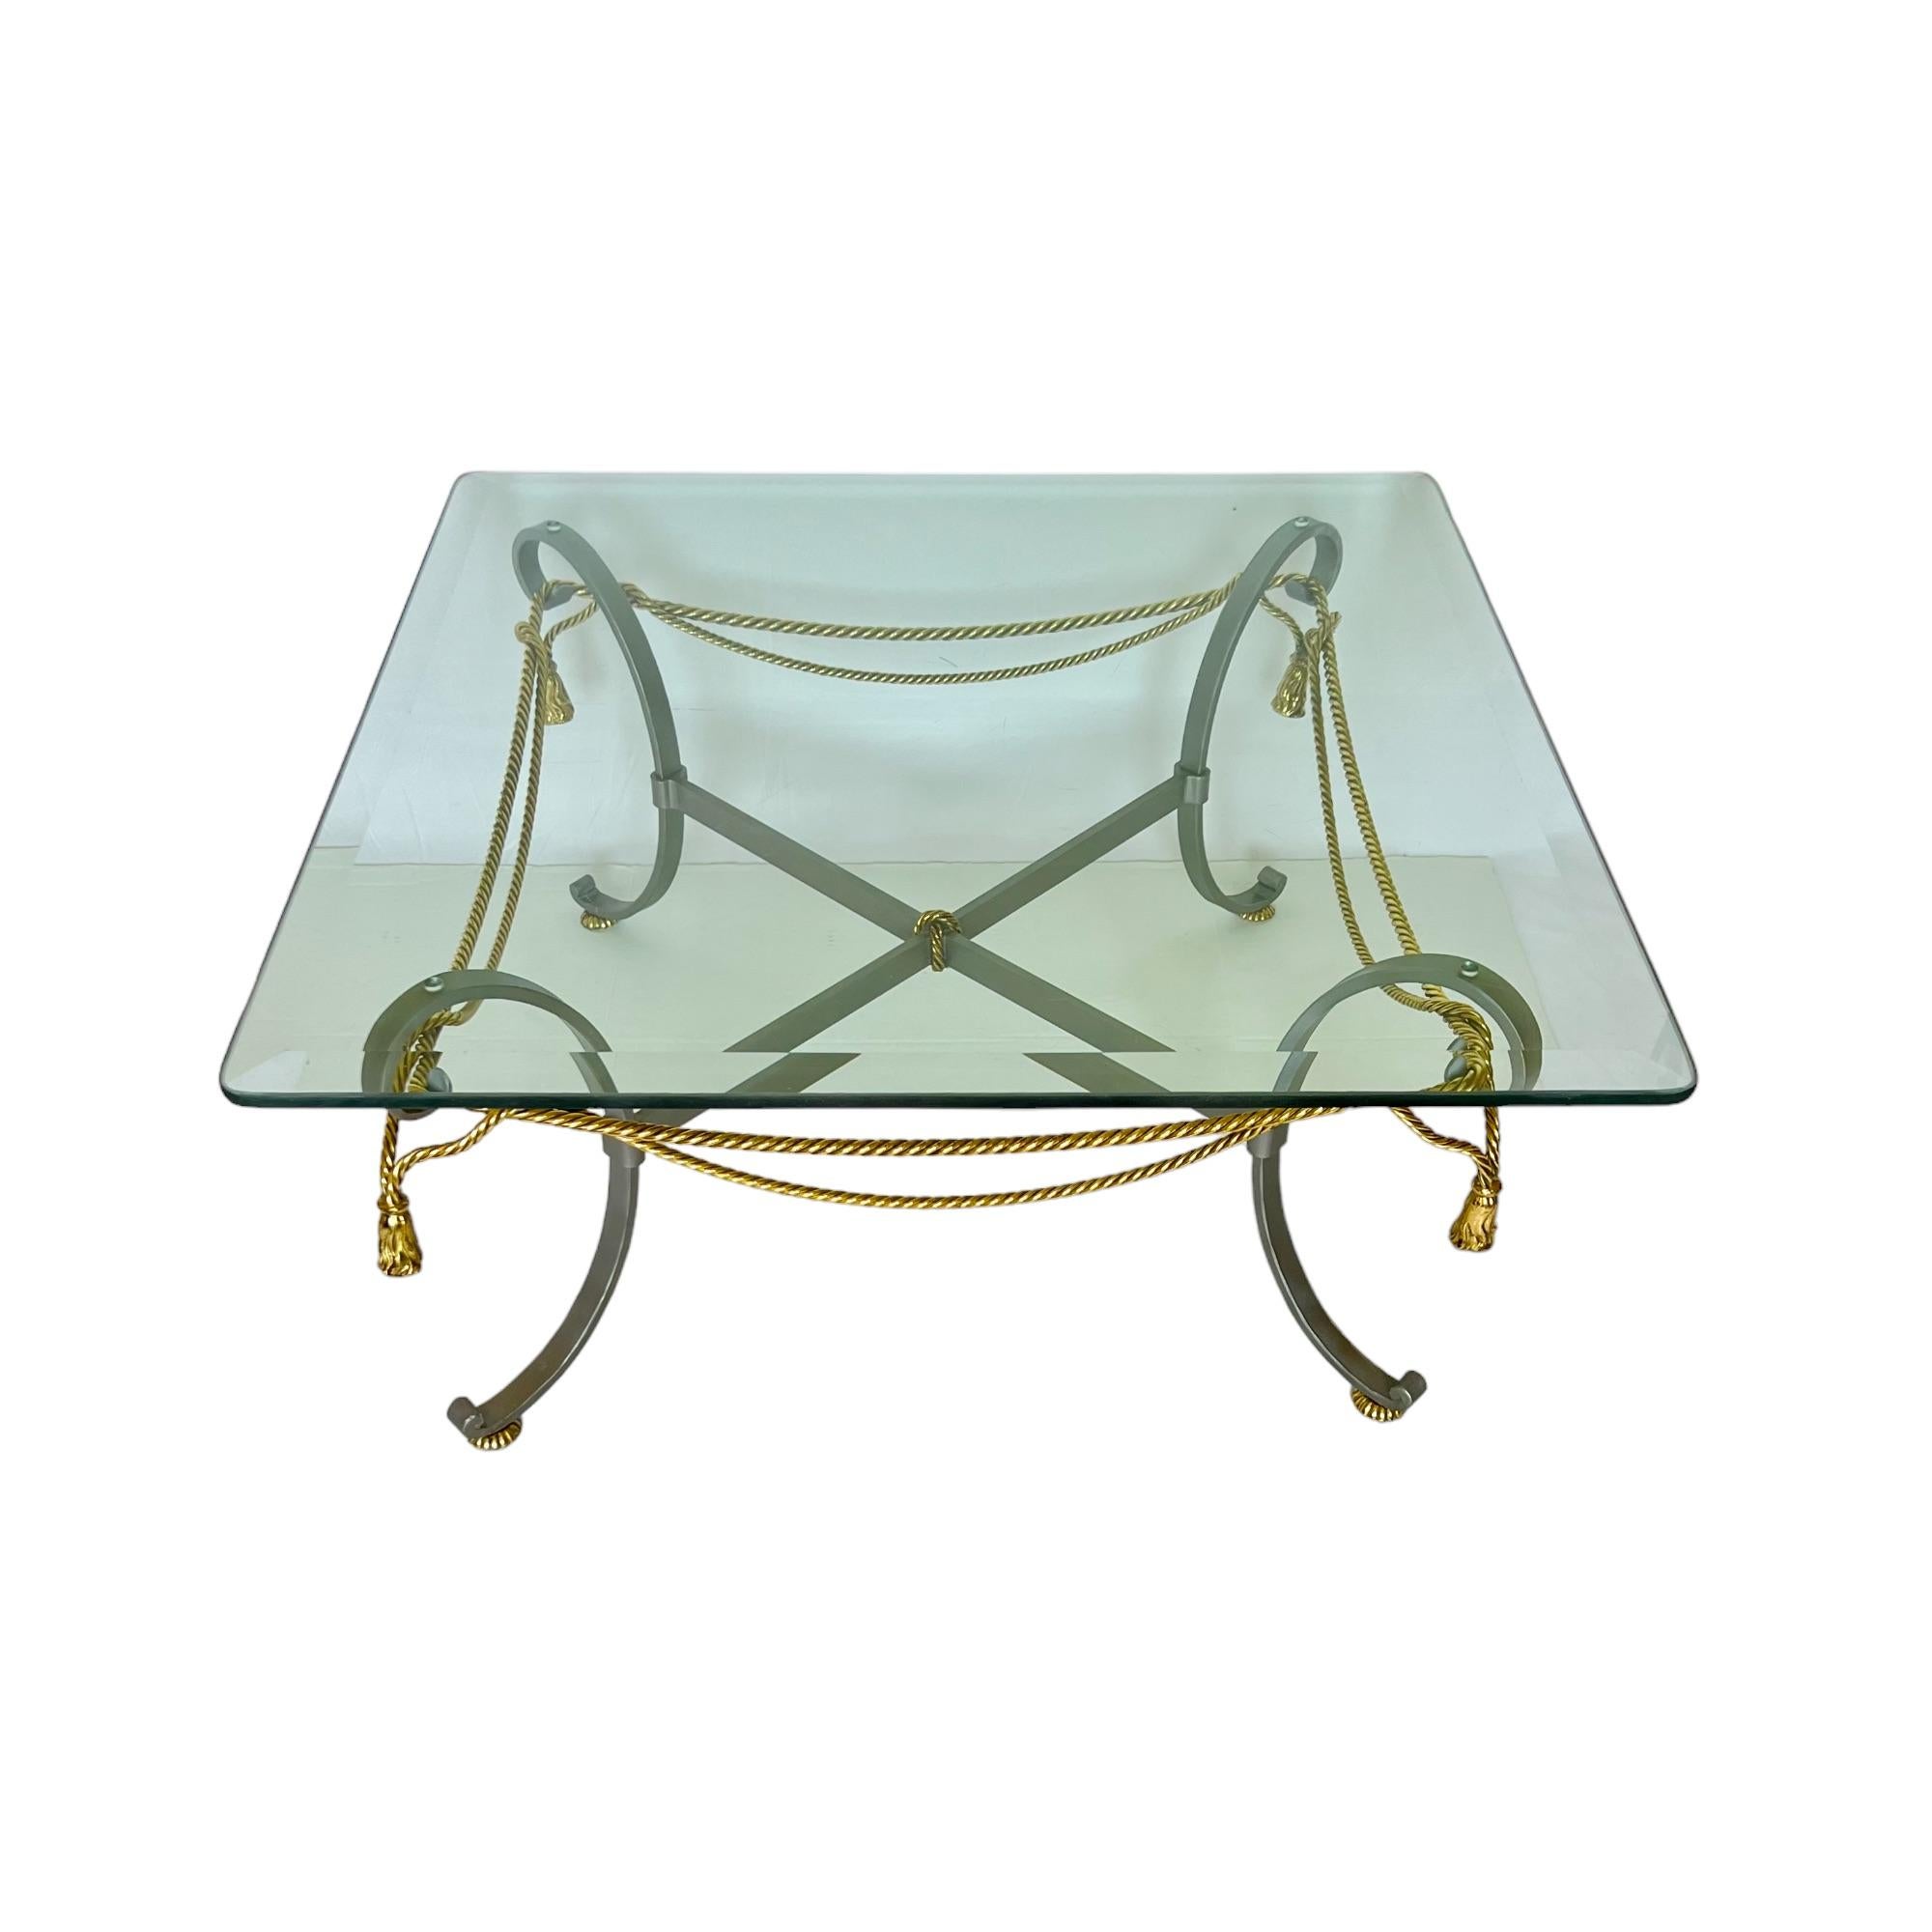 Beveled Maison Jansen Style Mixed Metal Rope & Tassel Glass Top Coffee Table, 1970s For Sale